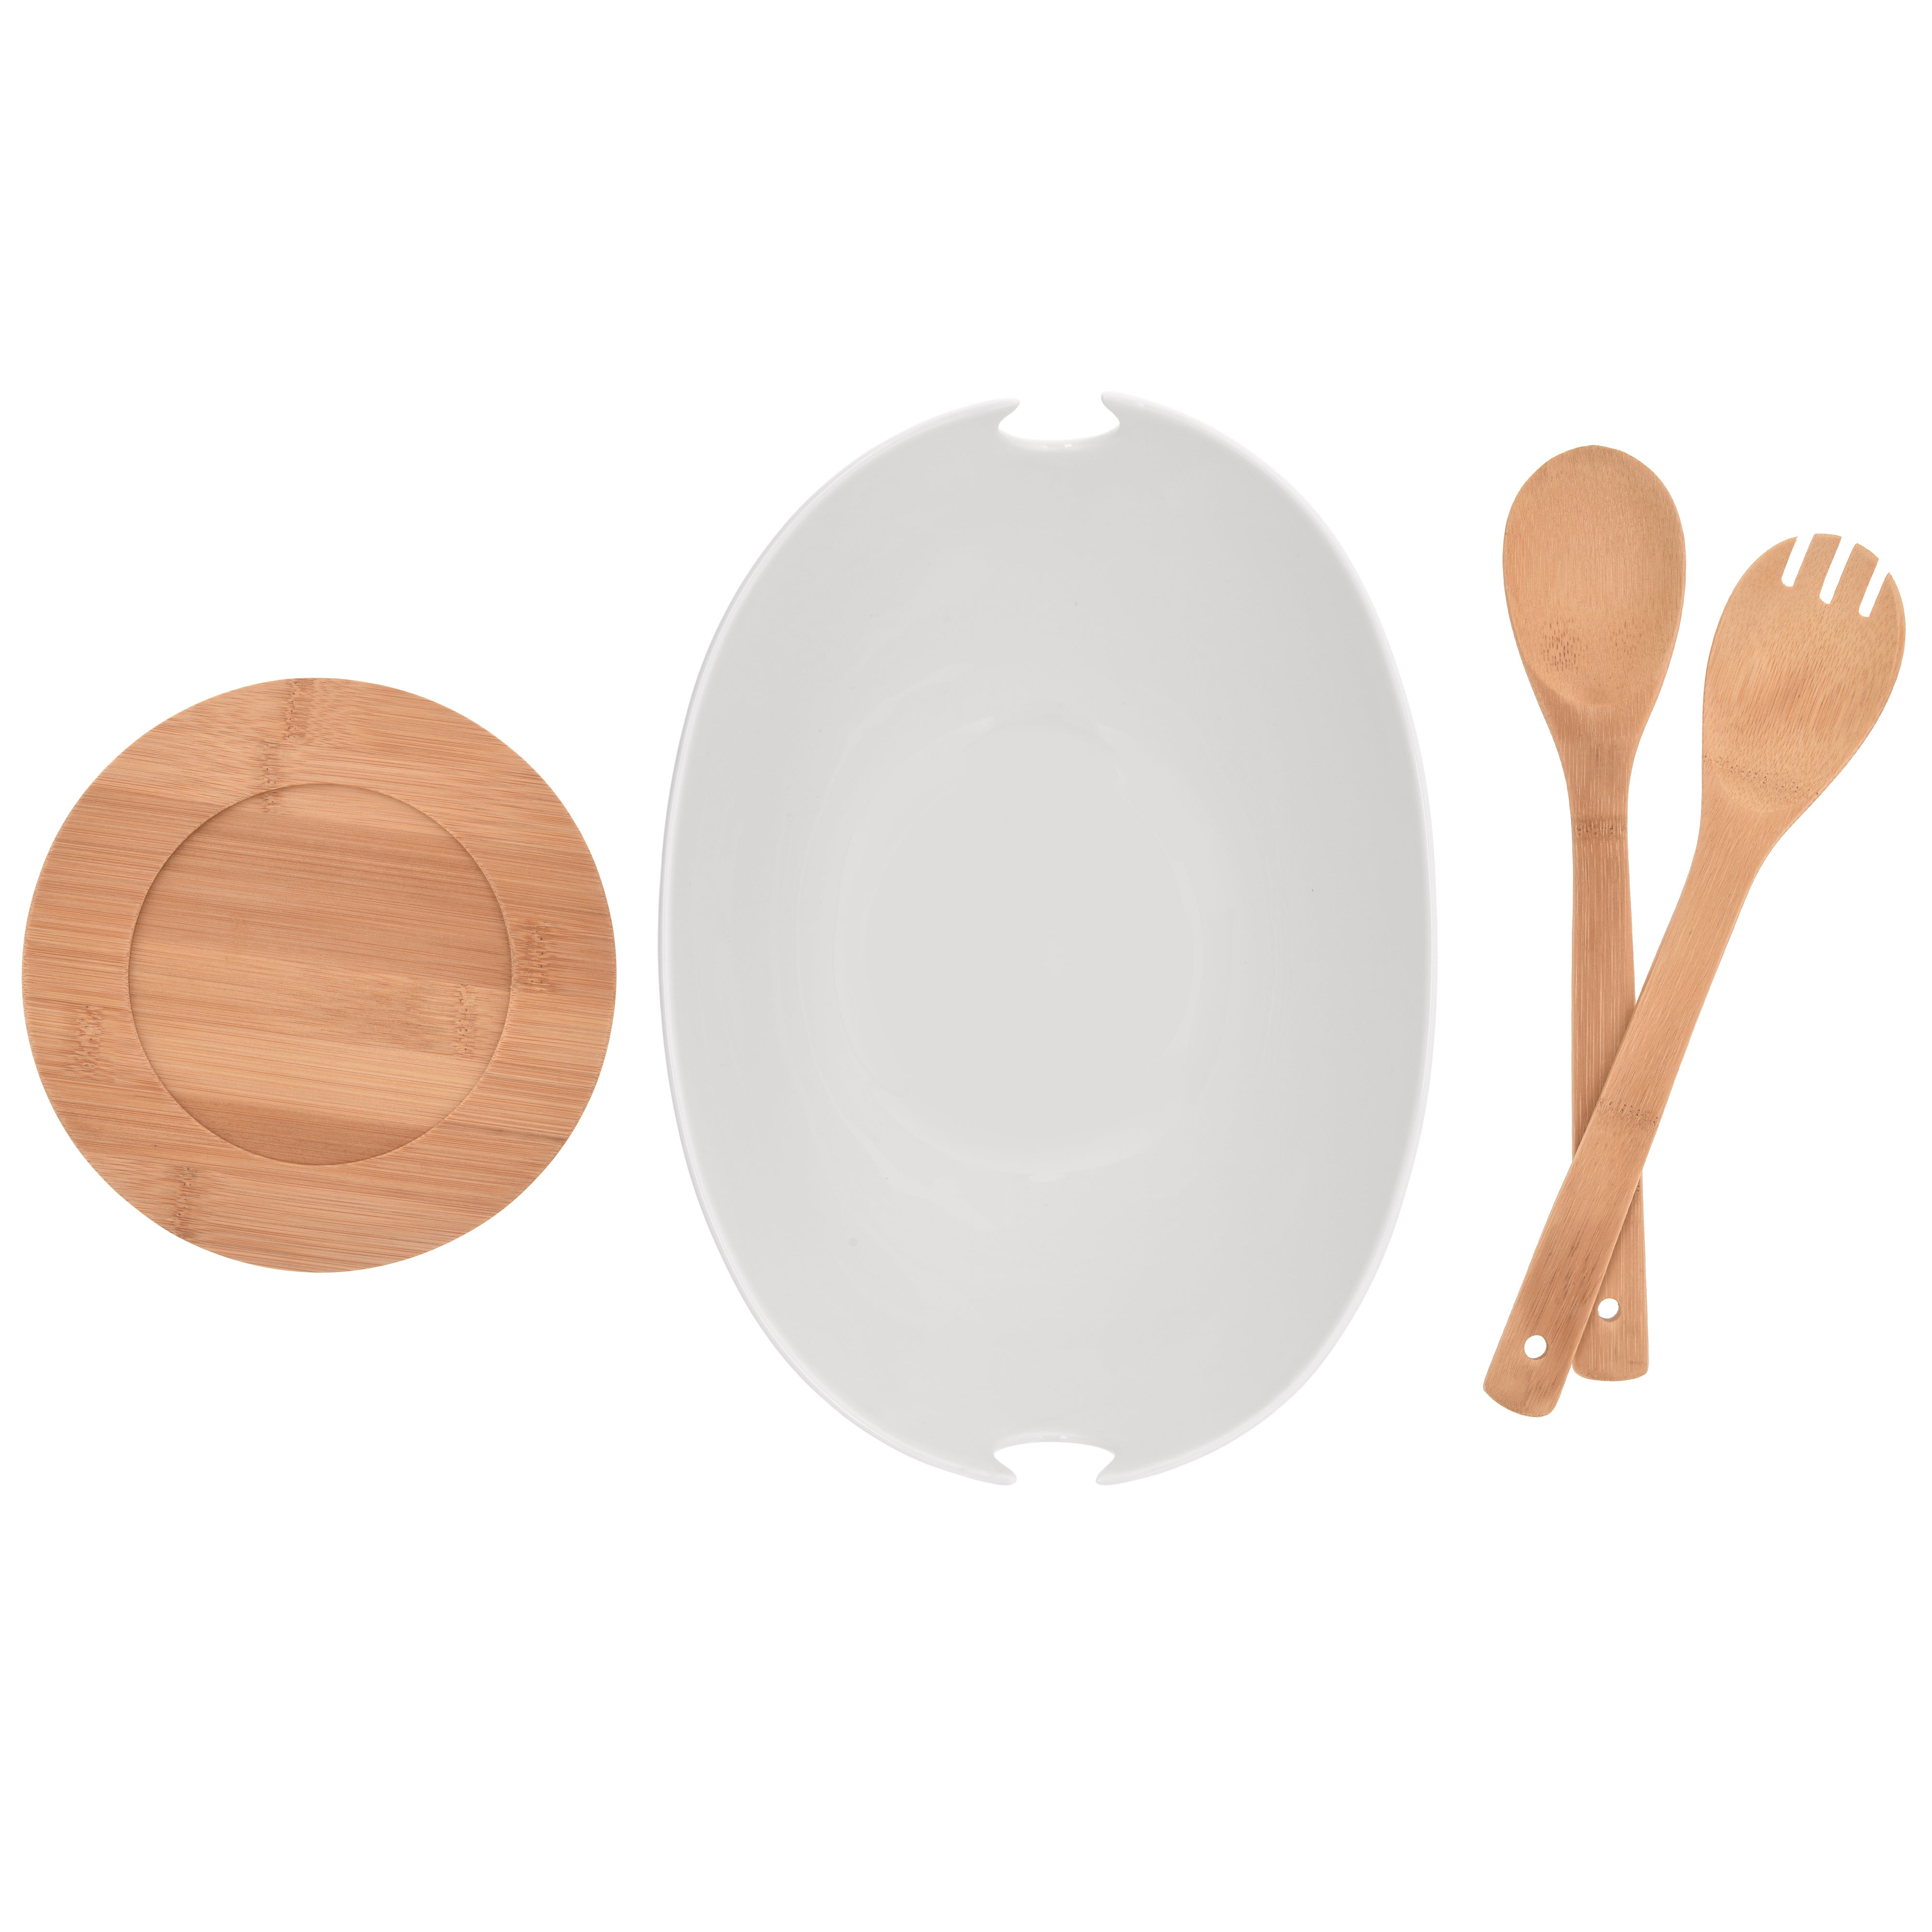 Large Salad Bowl with Wood Base and Bamboo Serving Utensils